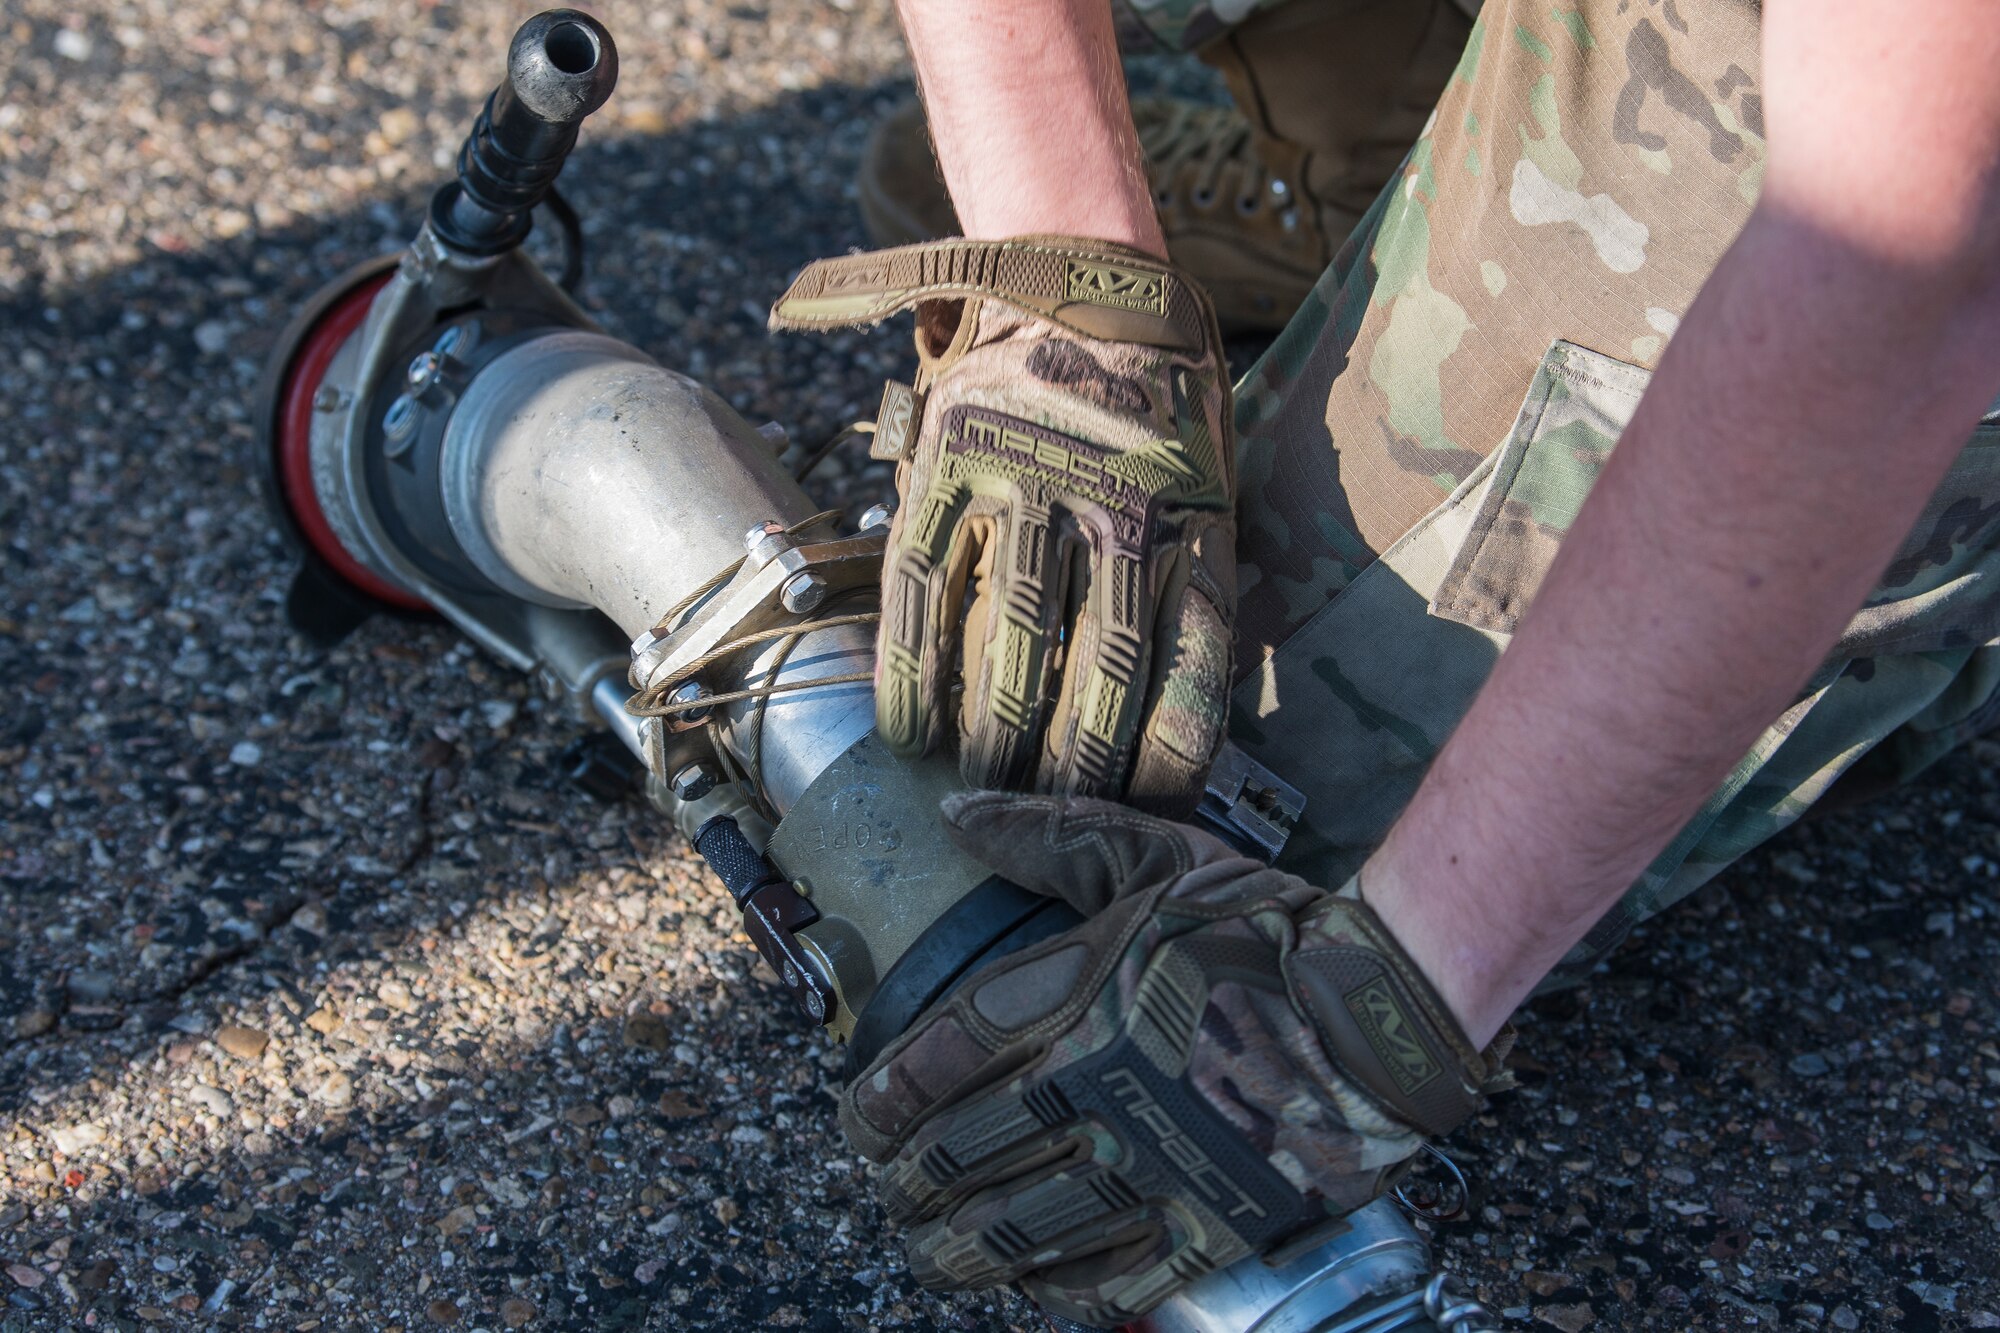 Airman 1st Class Caleb McDonald, 27th Special Operations Logistics Readiness Squadron fuels operator, unwinds a grounding cable from a fuel hose at the Forward Air Refueling Point tryouts at Cannon Air Force Base, N.M., October 9, 2019. The tryout has nine different tasks that have to be completed. (U.S. Air Force photo by Senior Airman Vernon R. Walter III)